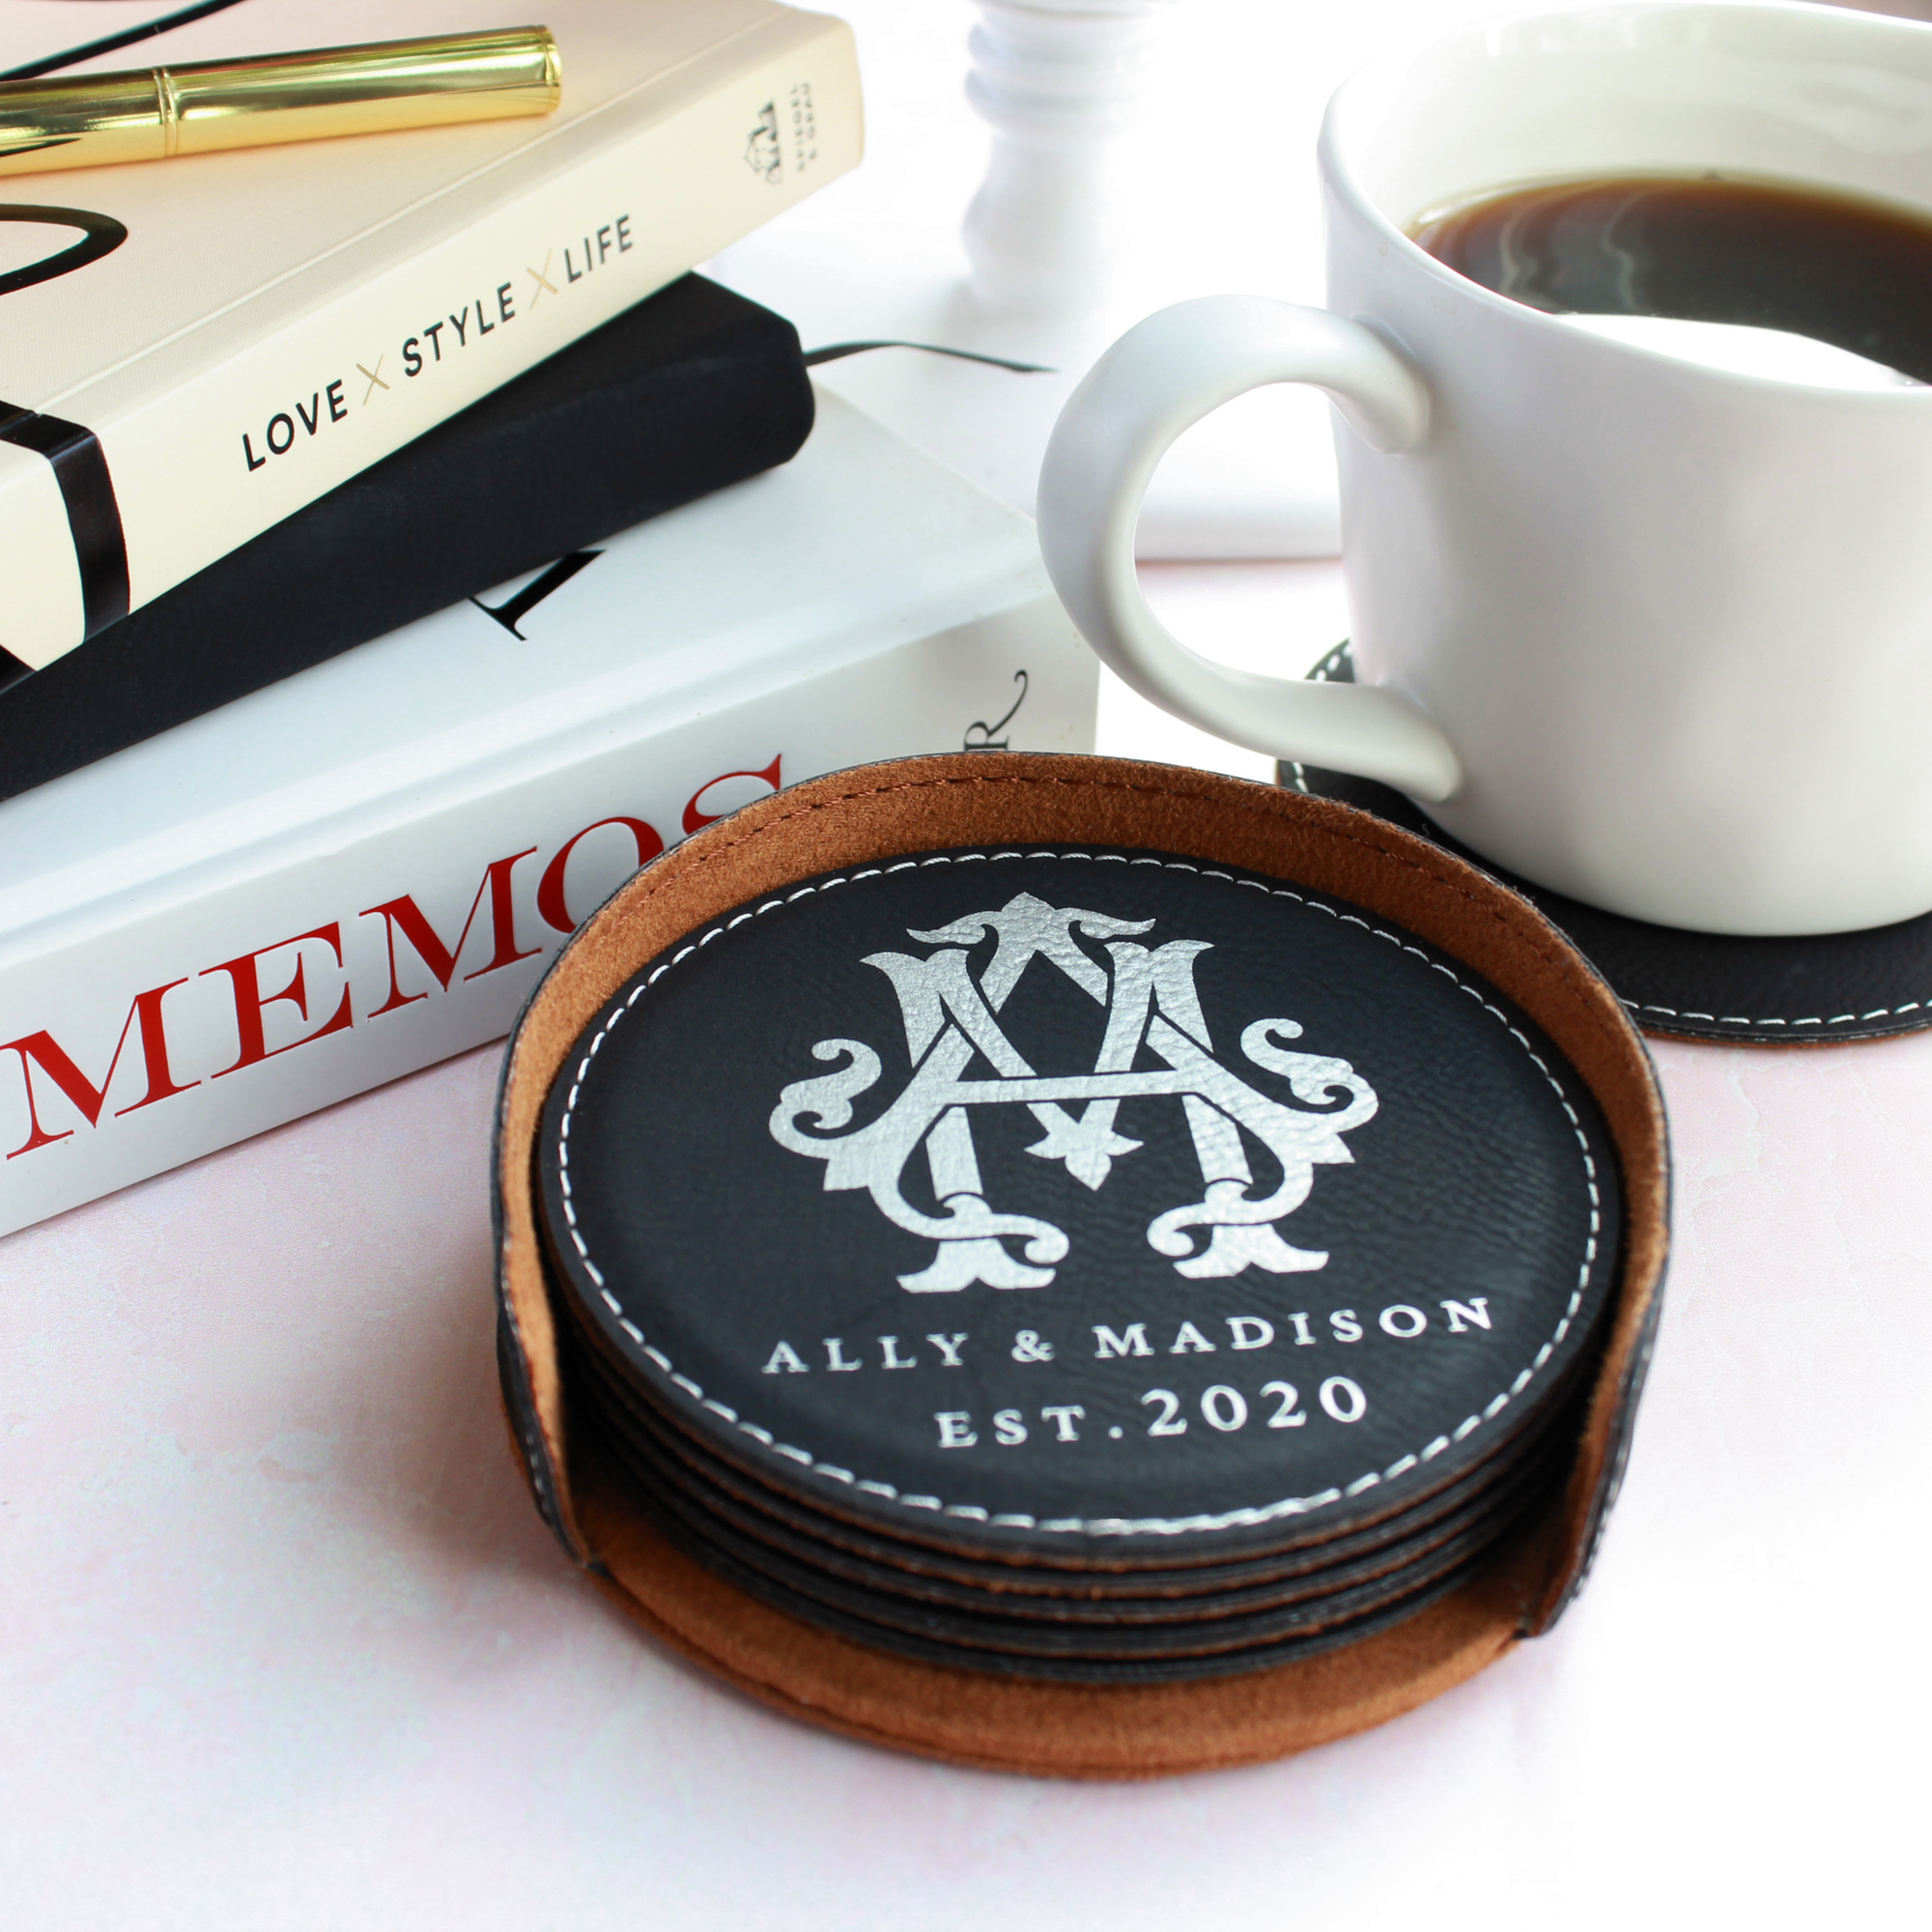 Personalized Leather Coasters - Round, Set of 6 with Holder